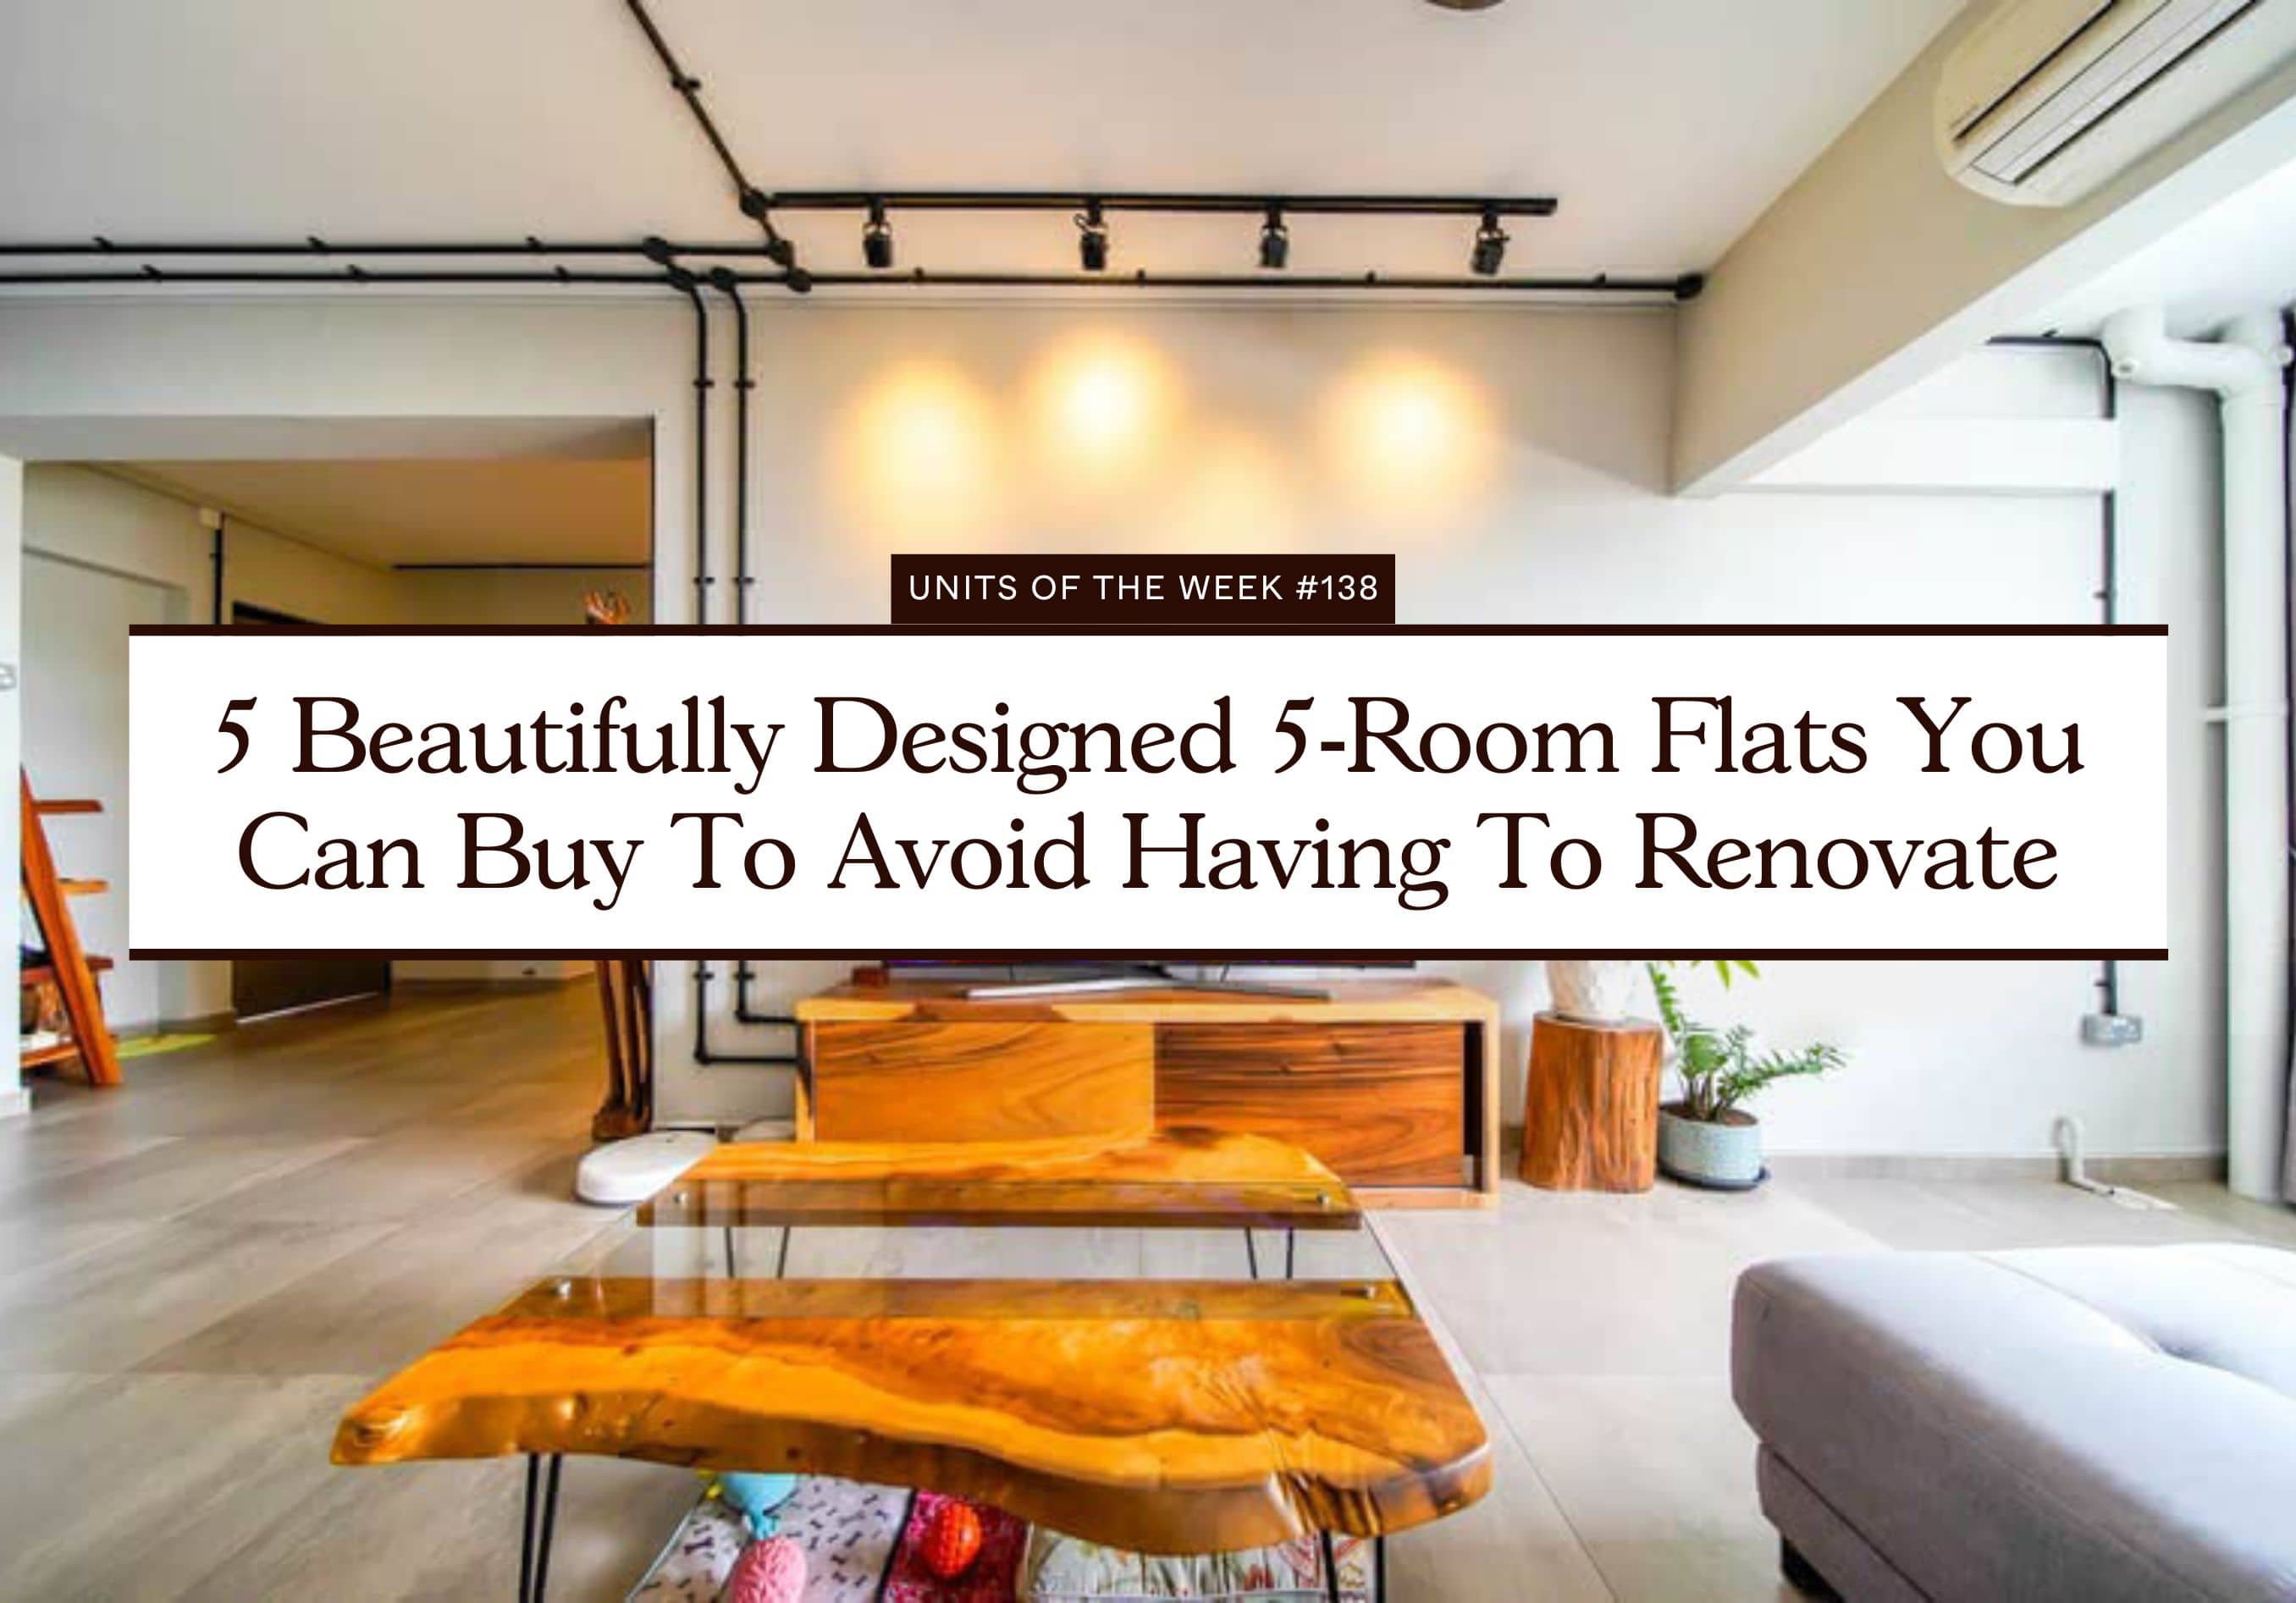 5 Beautifully Designed 5 Room Flats You Can Buy To Avoid Having To Renovate